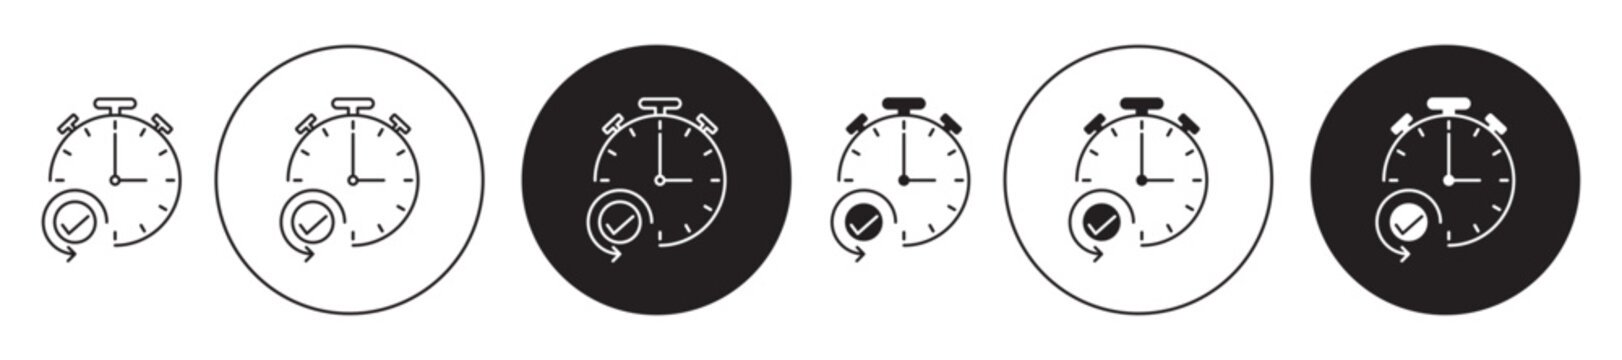 Any Time icon set. effective fast turnaround time vector symbol. anywhere quick delivery sign in black filled and outlined style.